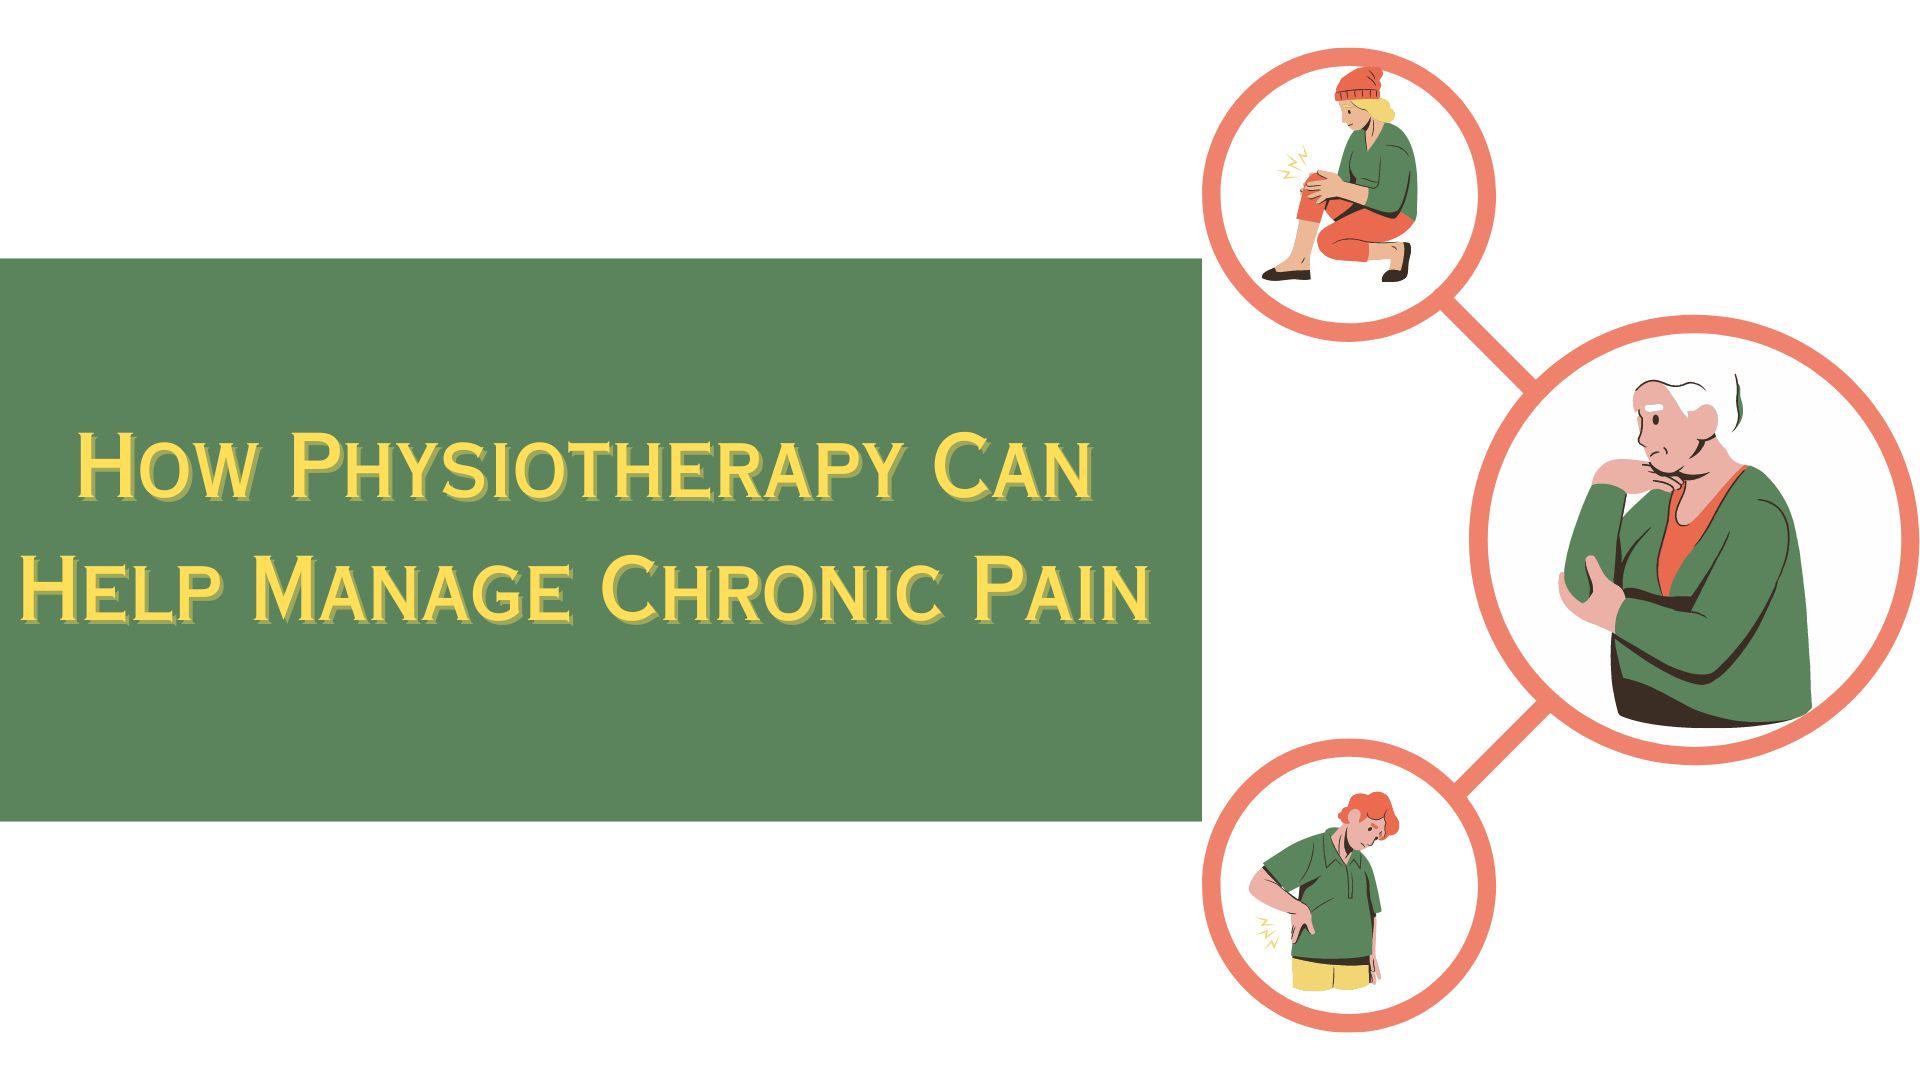 HOw PHYSIOTHERAPY CAN

HELP MANAGE CHRONIC PAIN